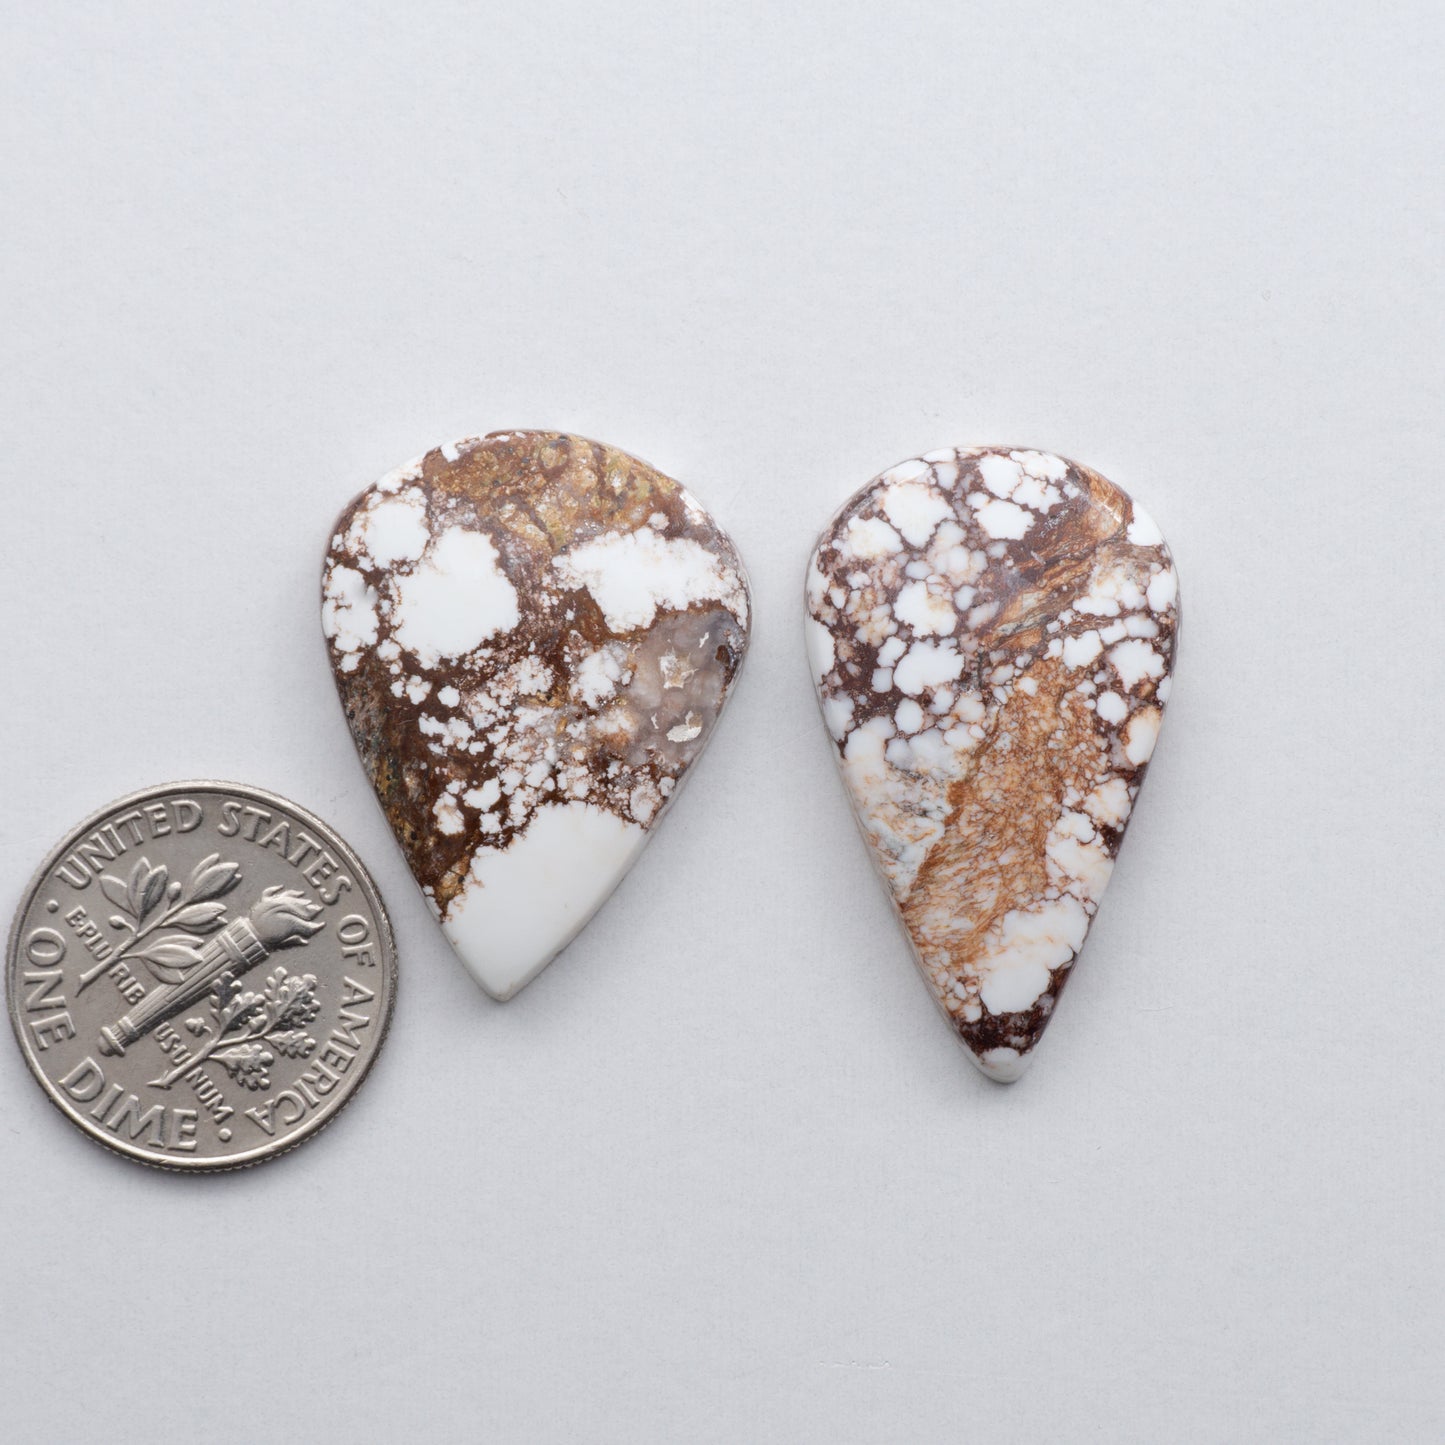 This stunning Wild Horse Cabochon lot is a magnificent addition to any collection. Crafted from natural Magnesite material, it features an intricate design that will instantly add beauty and sophistication to any jewelry design. These stones are unbacked.